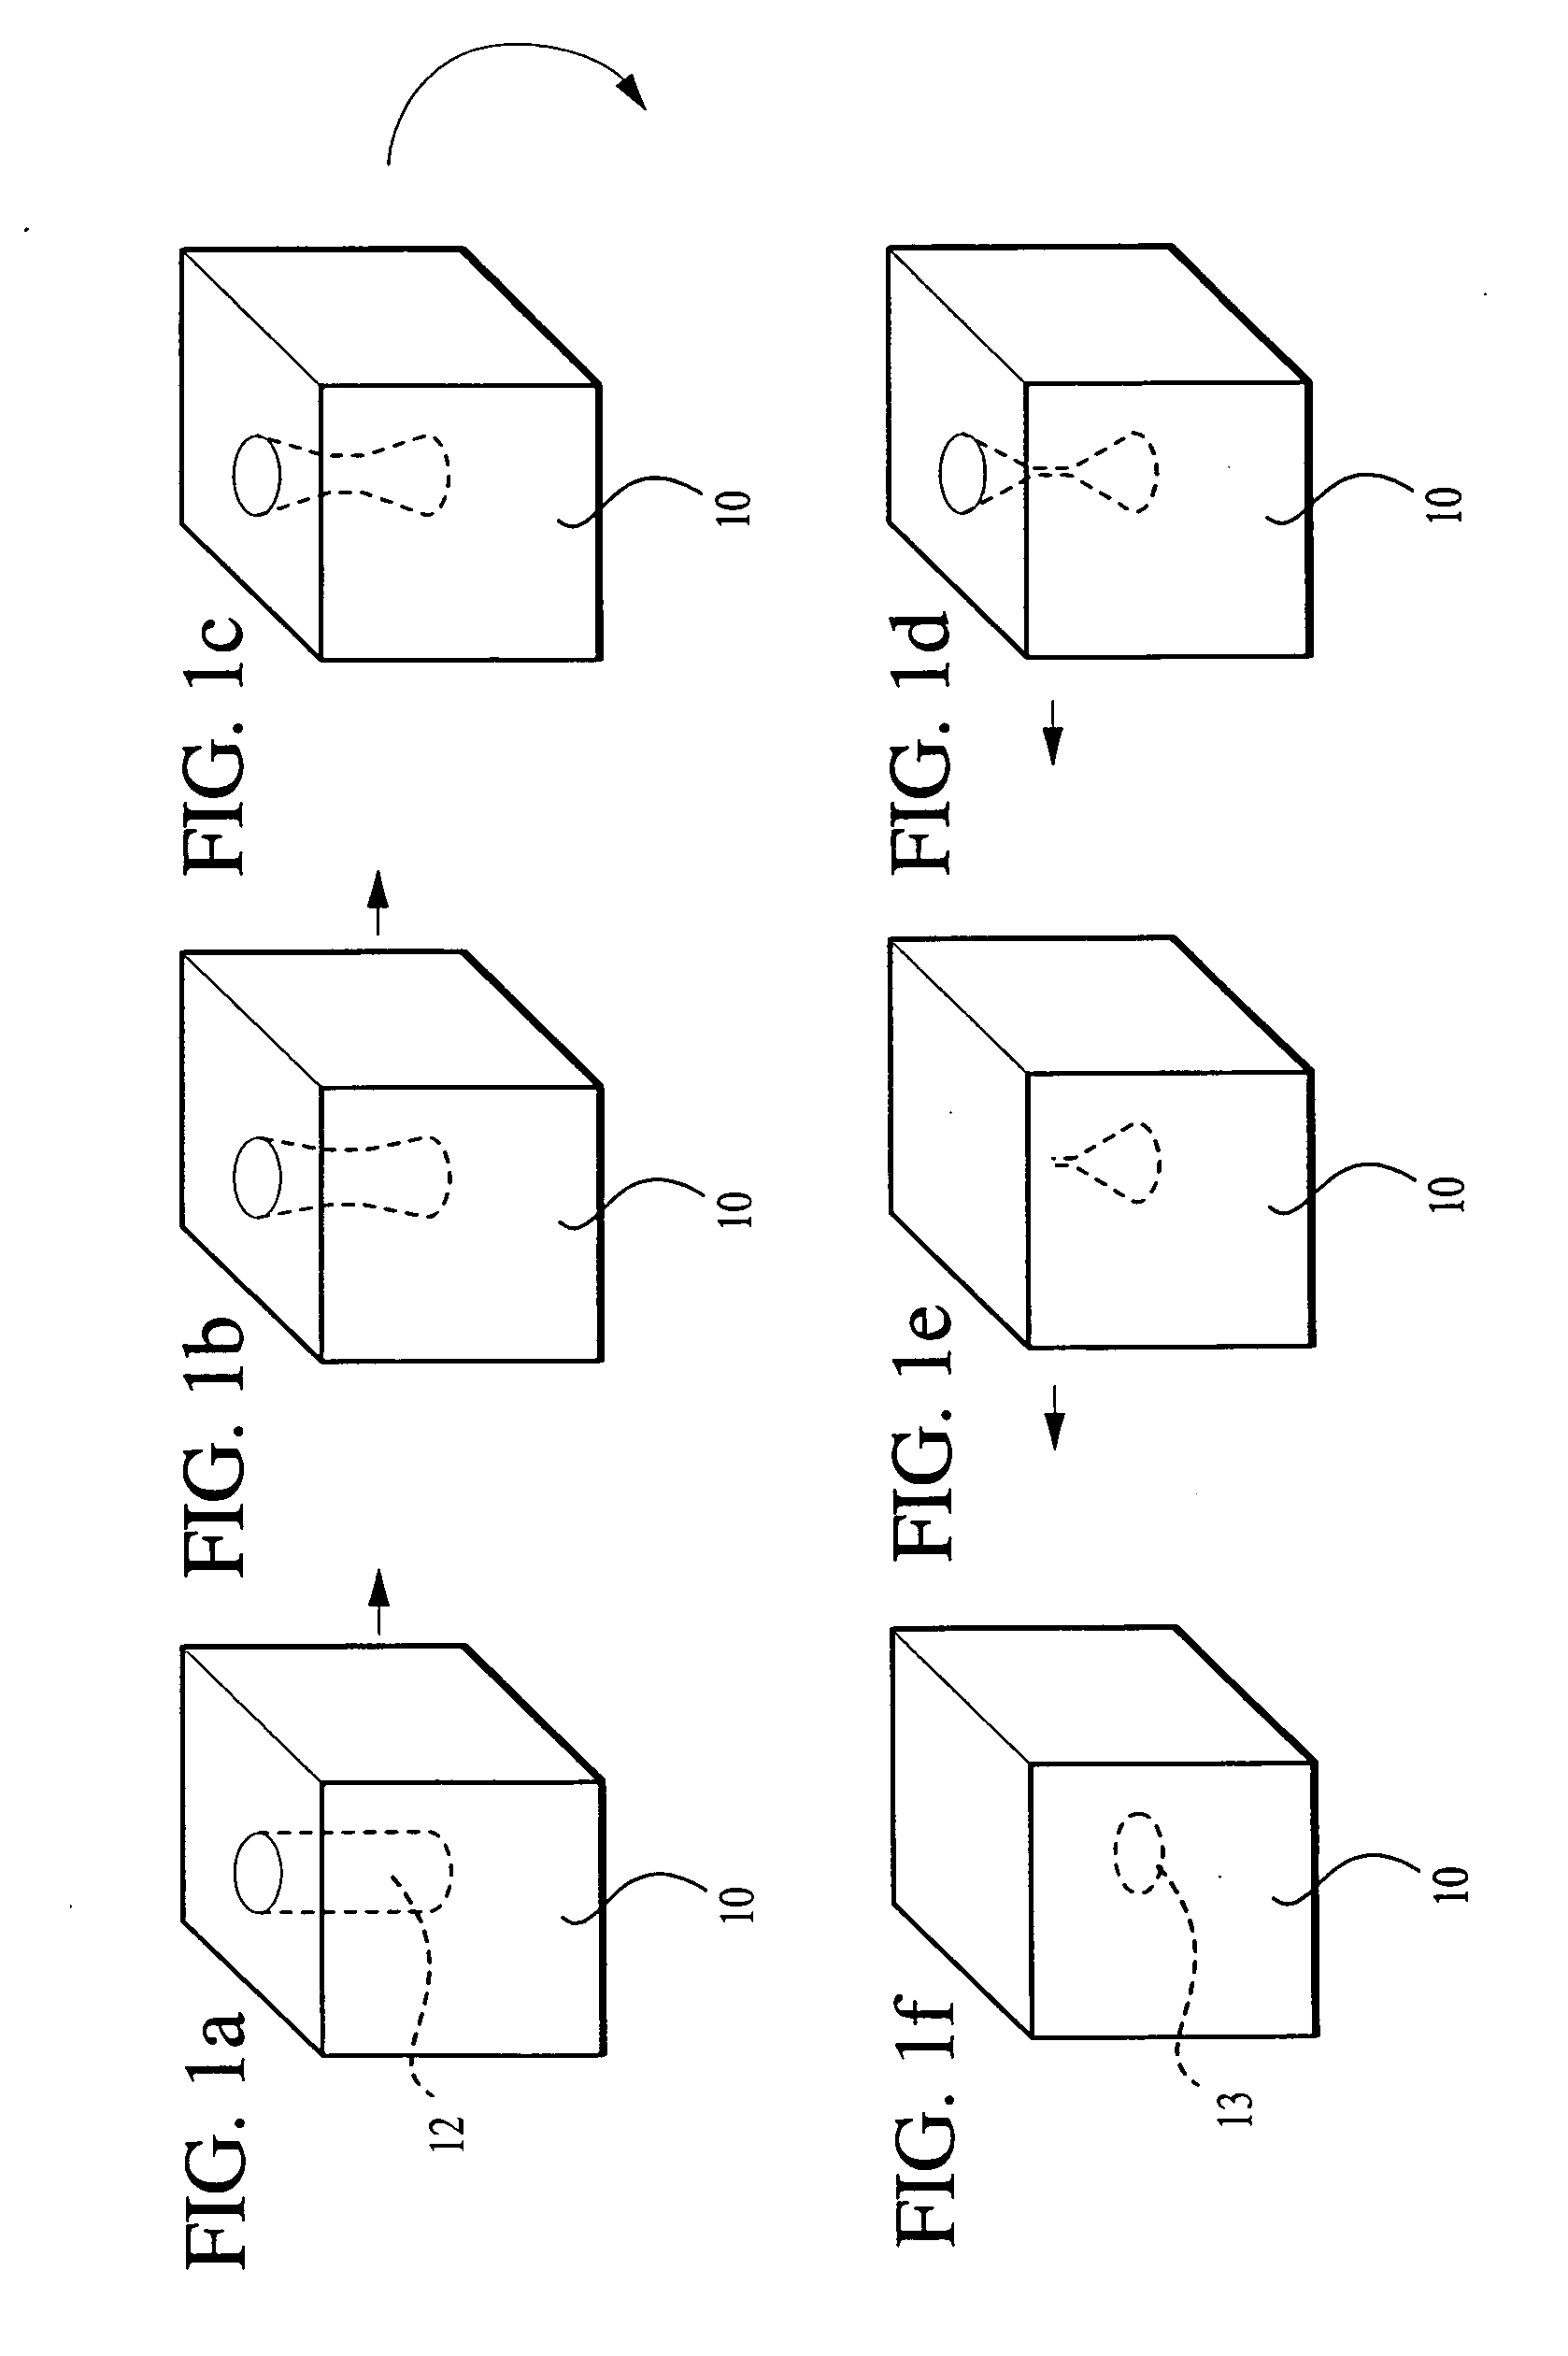 Method of forming mirrors by surface transformation of empty spaces in solid state materials